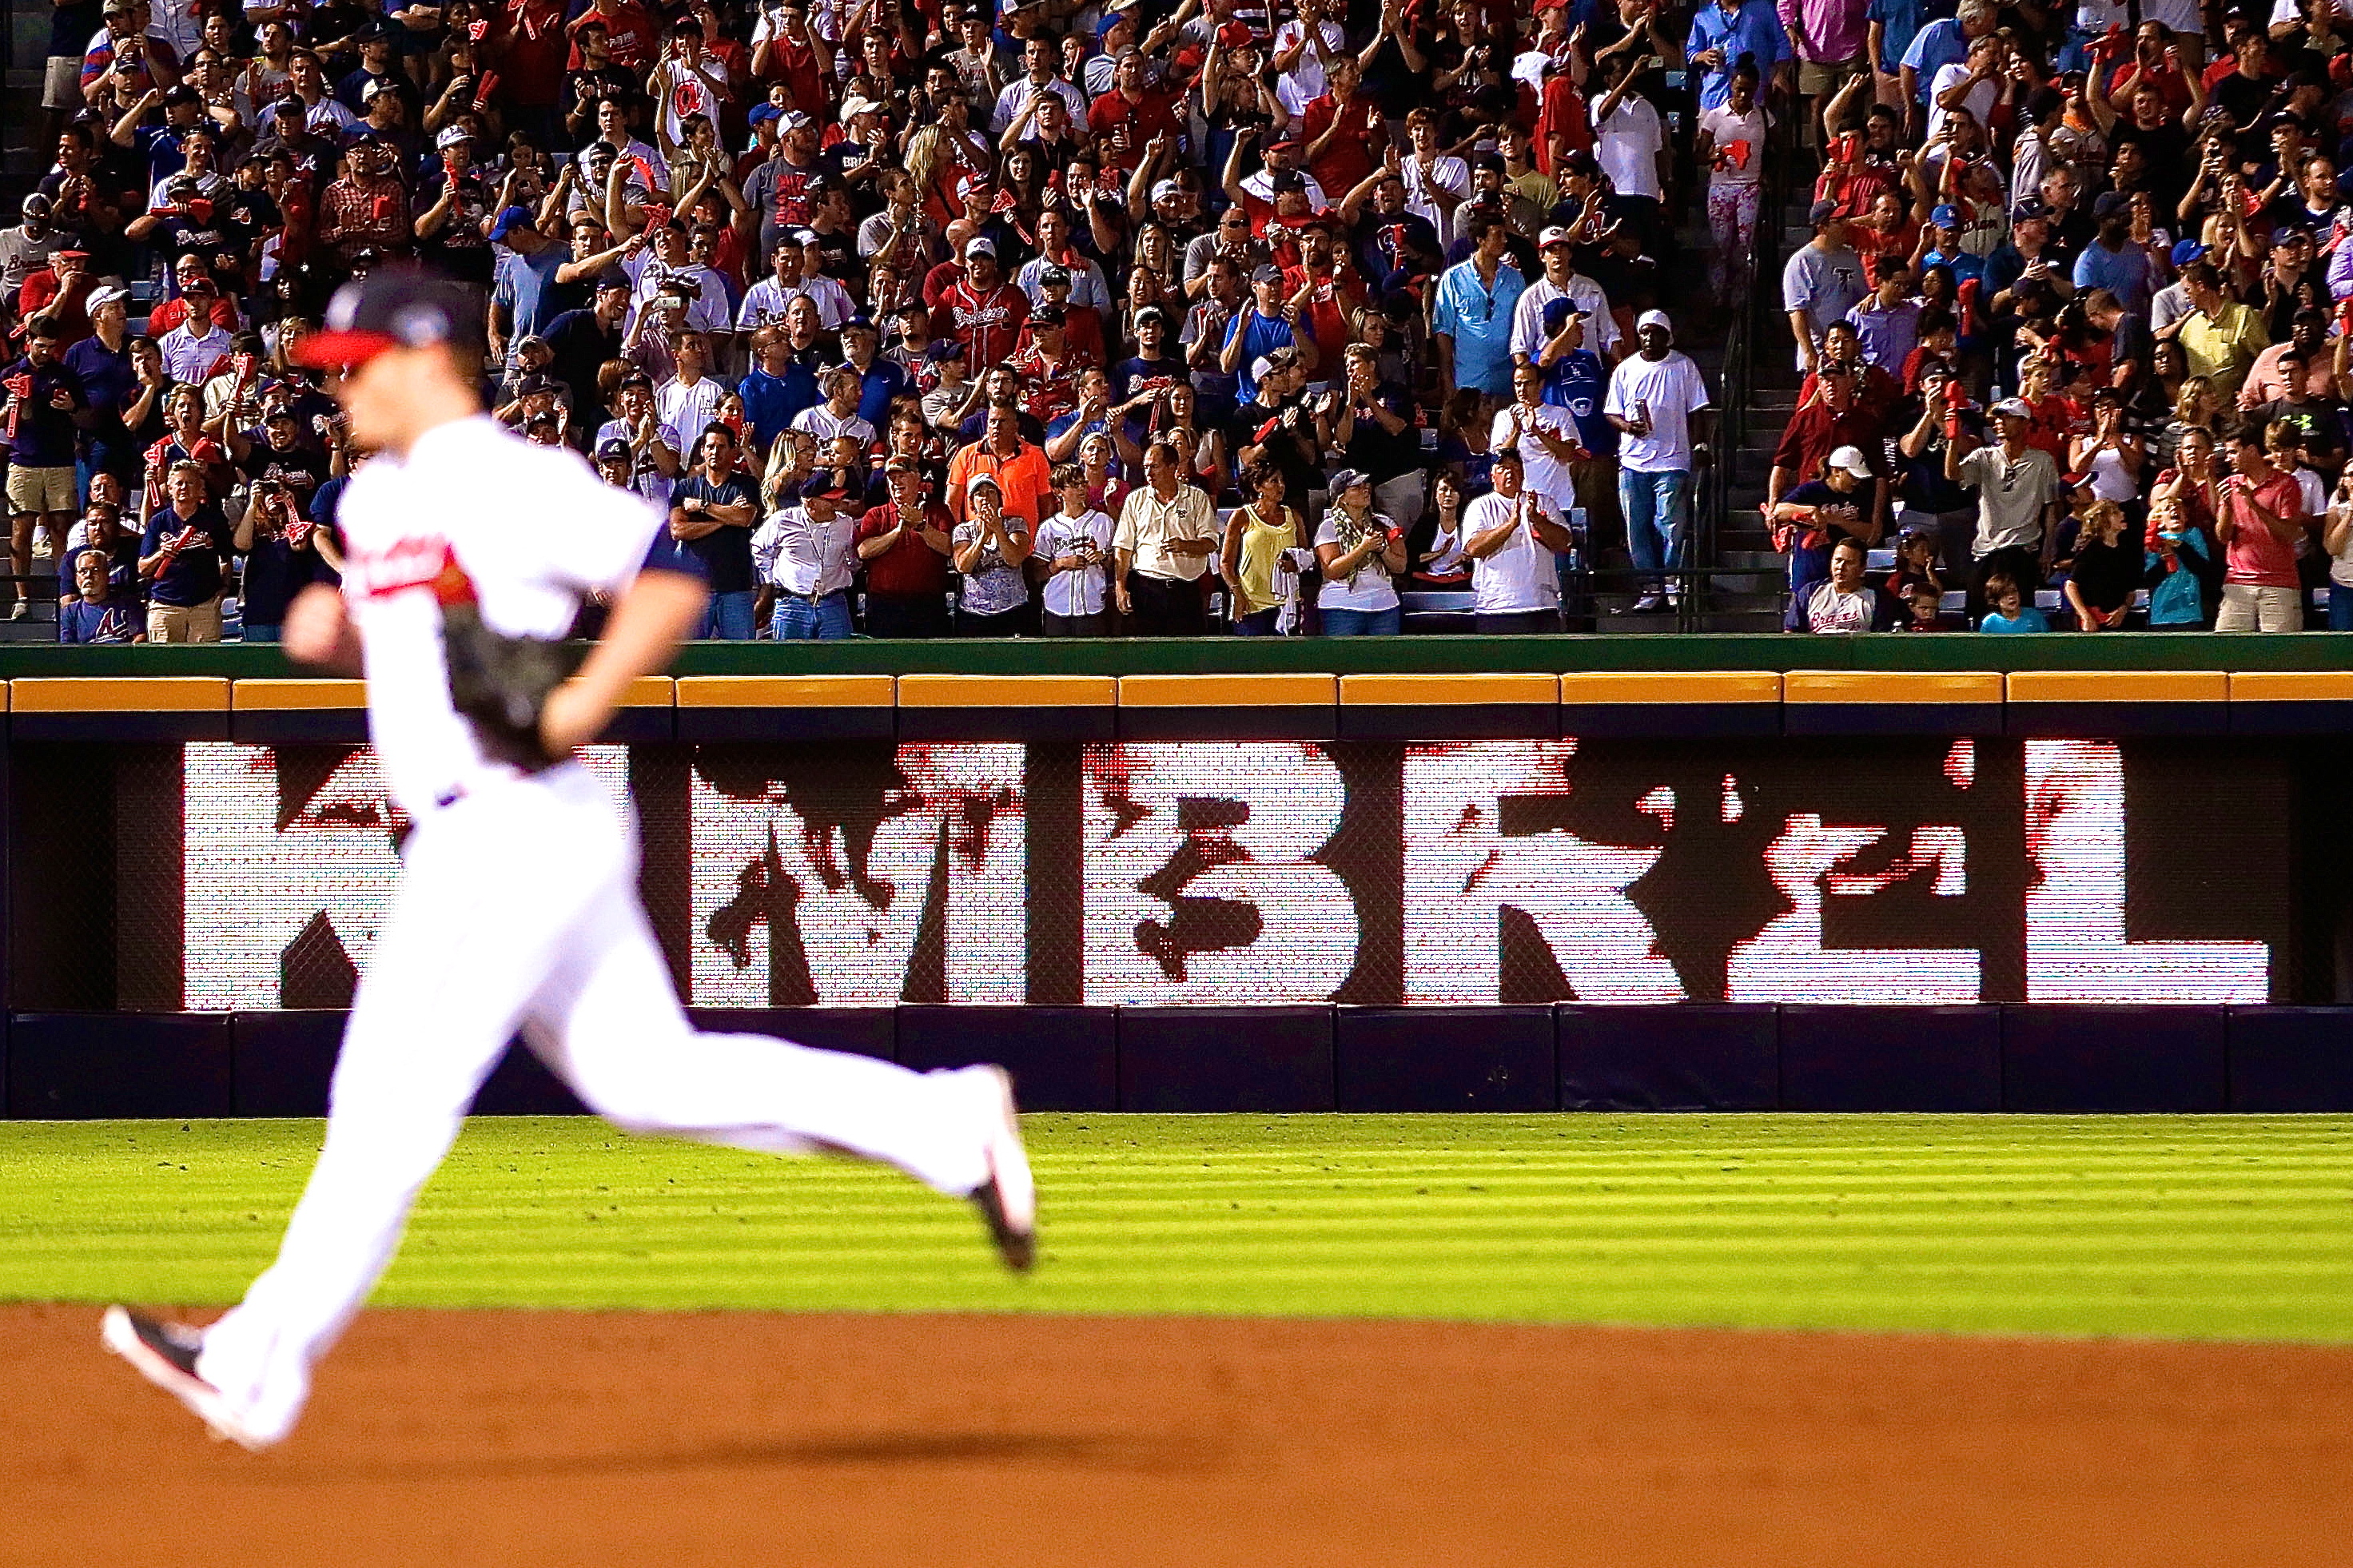 Braves give Turner Field a rousing send-off in final game